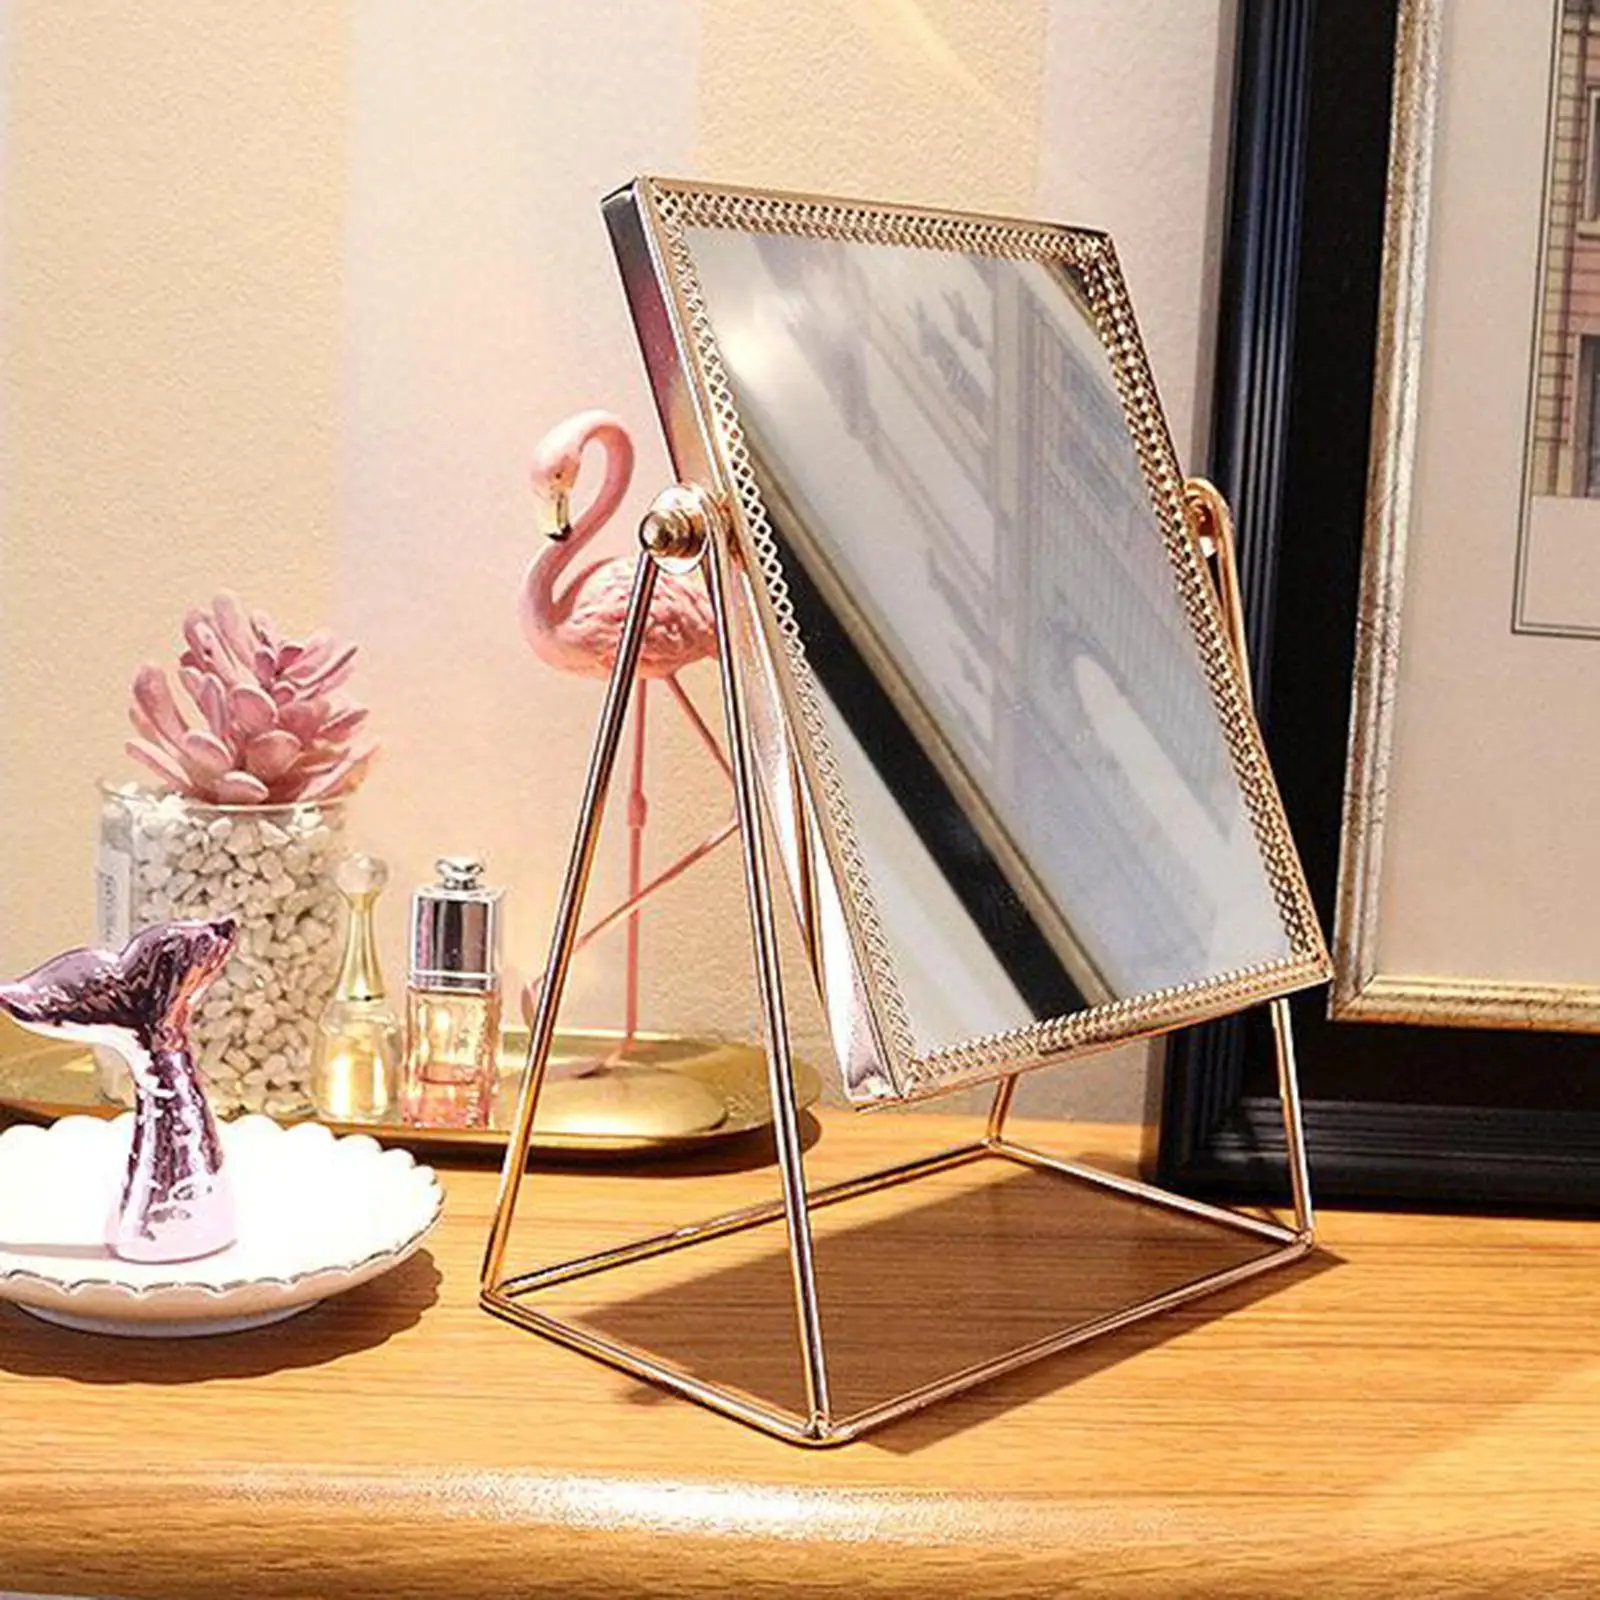 Metal Tabletop Antique Makeup Mirror with Stand Vintage Swivel Cosmetic Mirror with Frame Dressing Mirror for Bathroom Bedroom